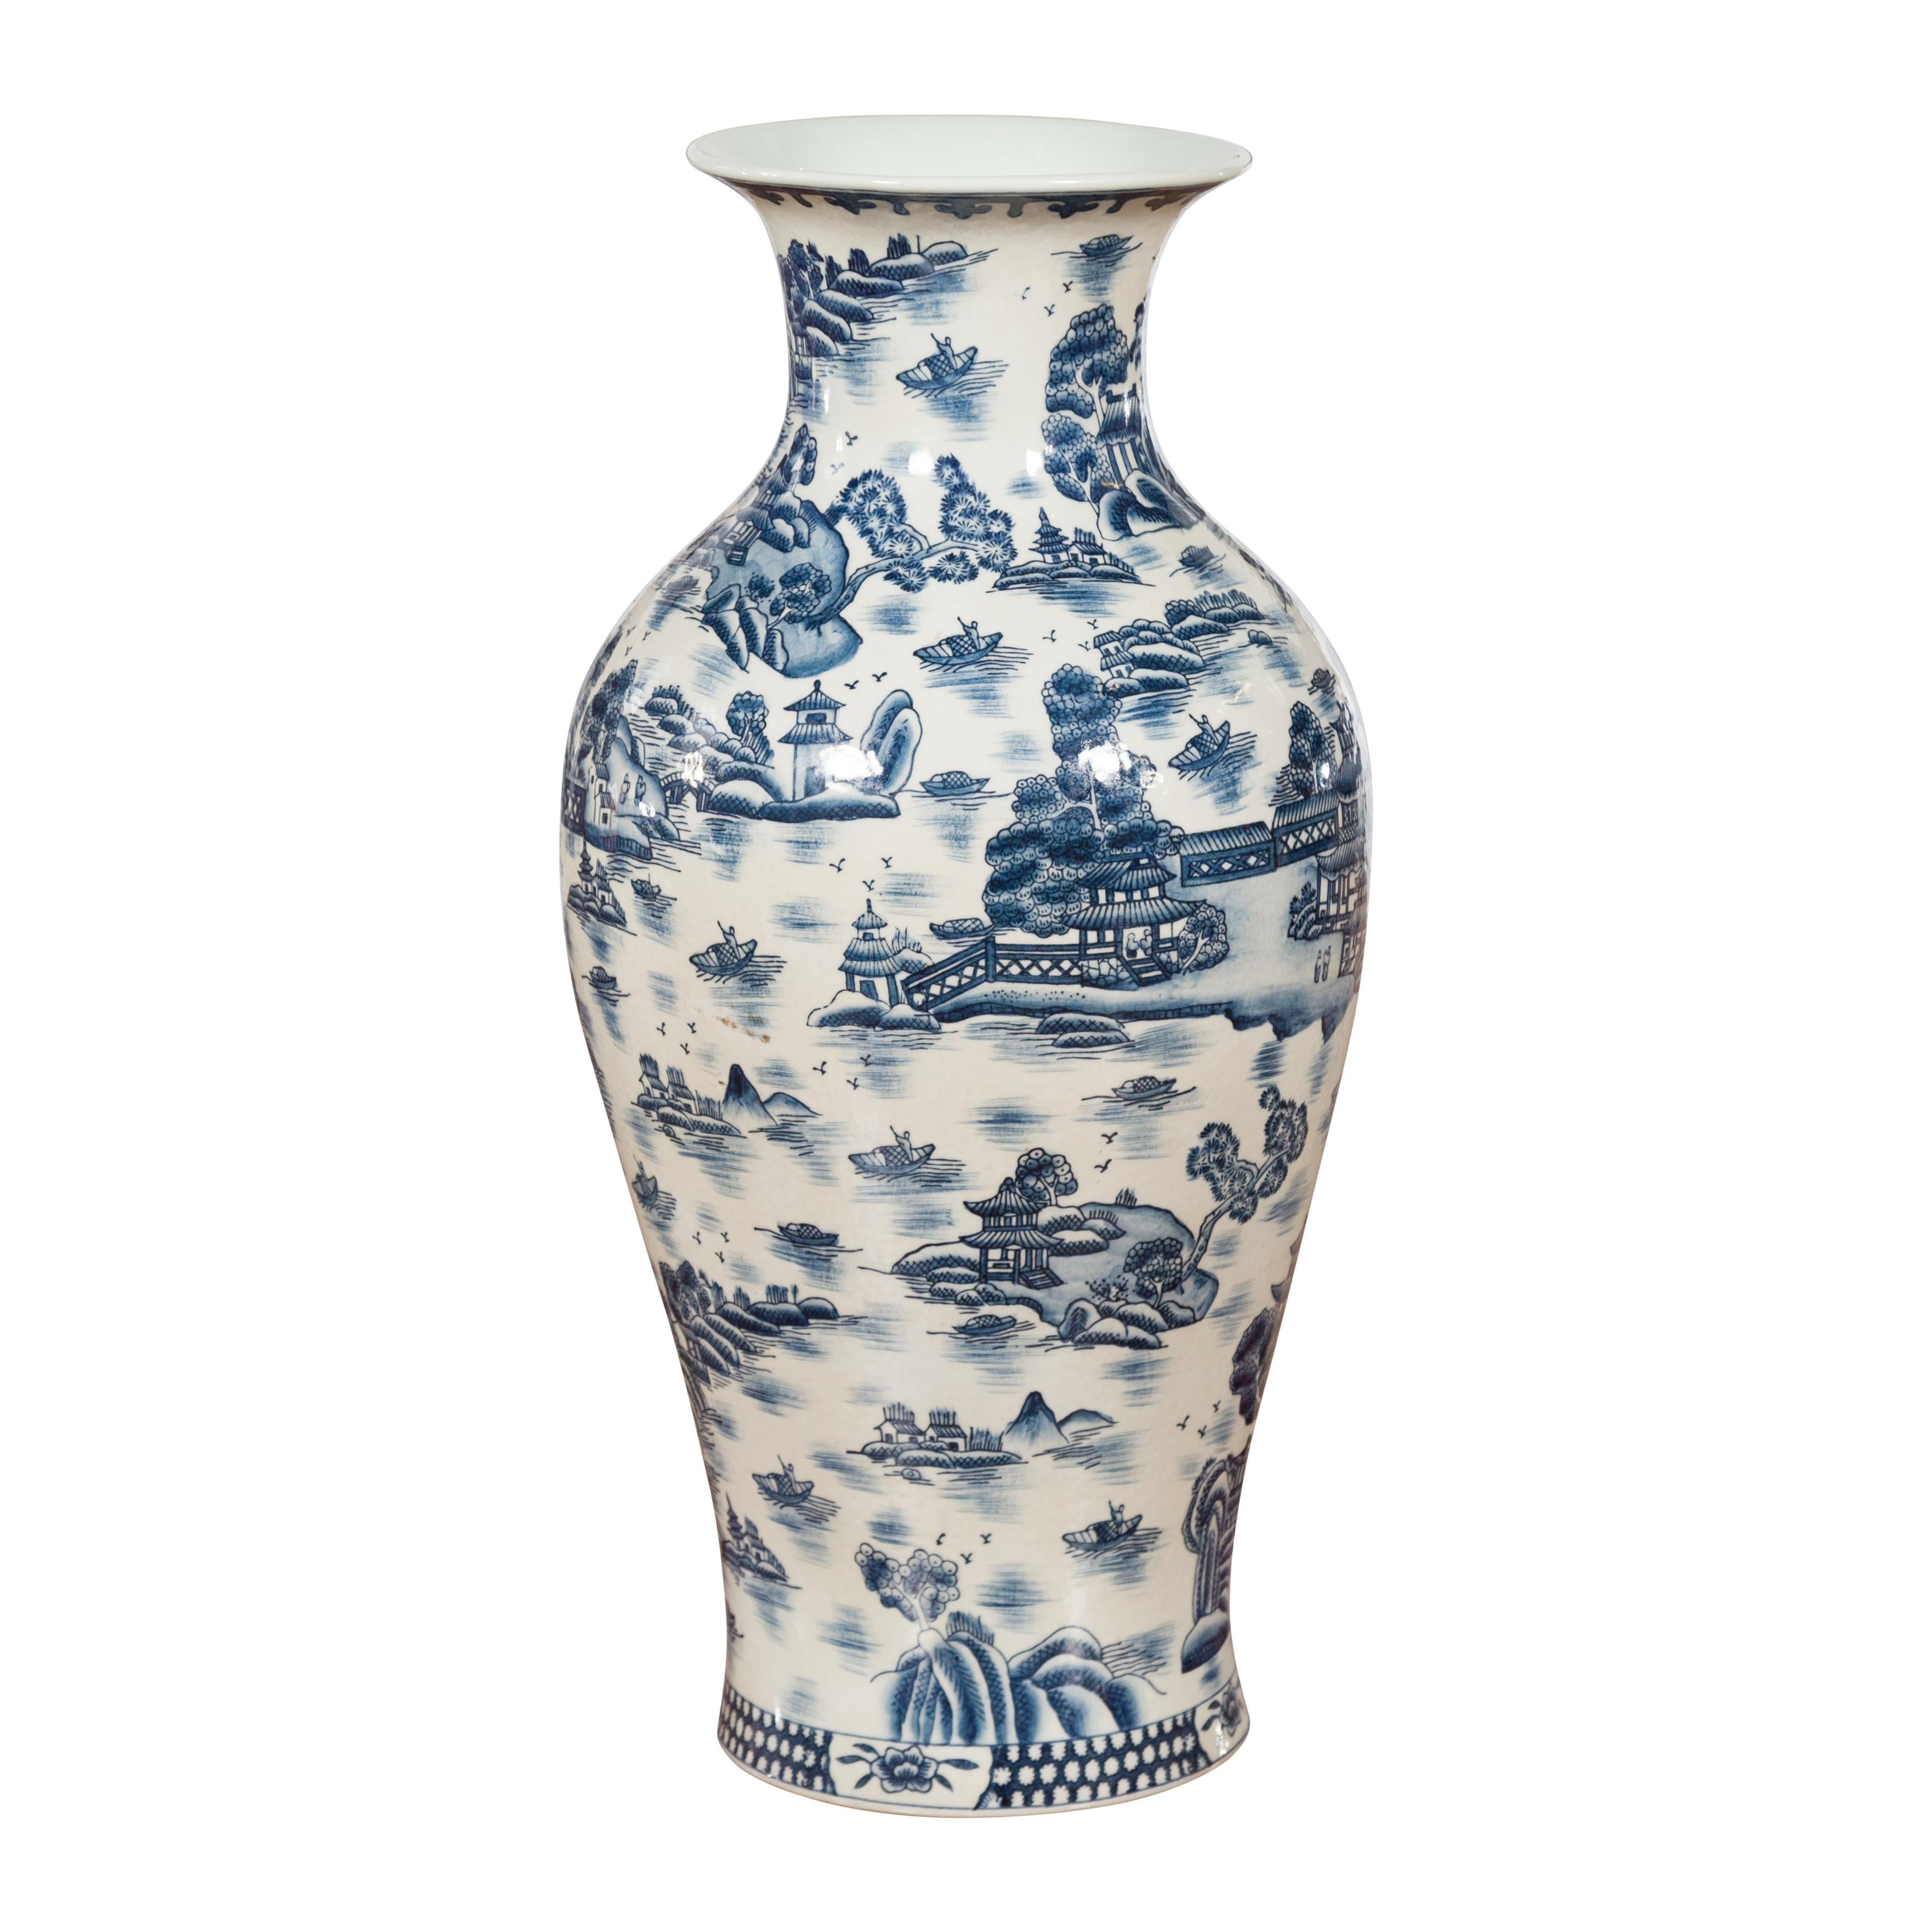 A vintage Chinese porcelain vase from the mid 20th century, with hand-painted blue and white body. Created in China during the midcentury period, this porcelain vase features a nicely curving silhouette topped with a narrow neck and a splaying